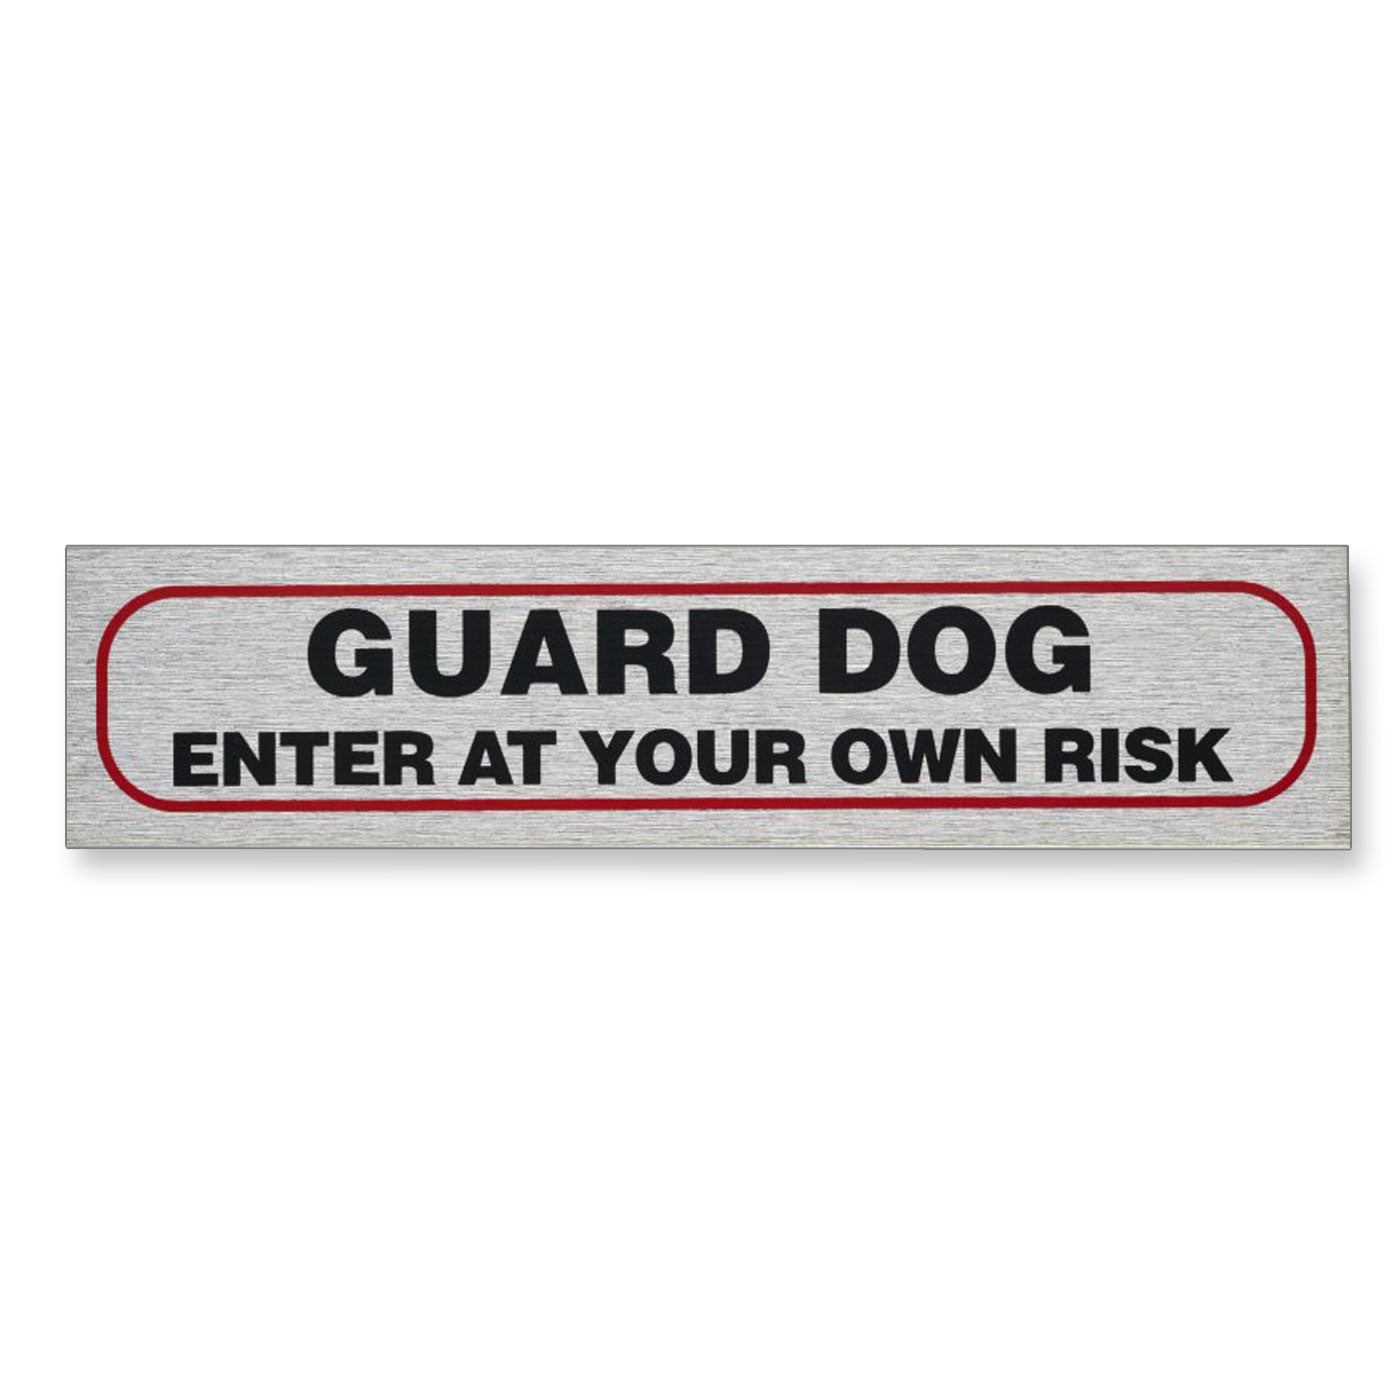 Self-Adhesive Information Sign "GUARD DOG - ENTER AT YOUR OWN RISK"